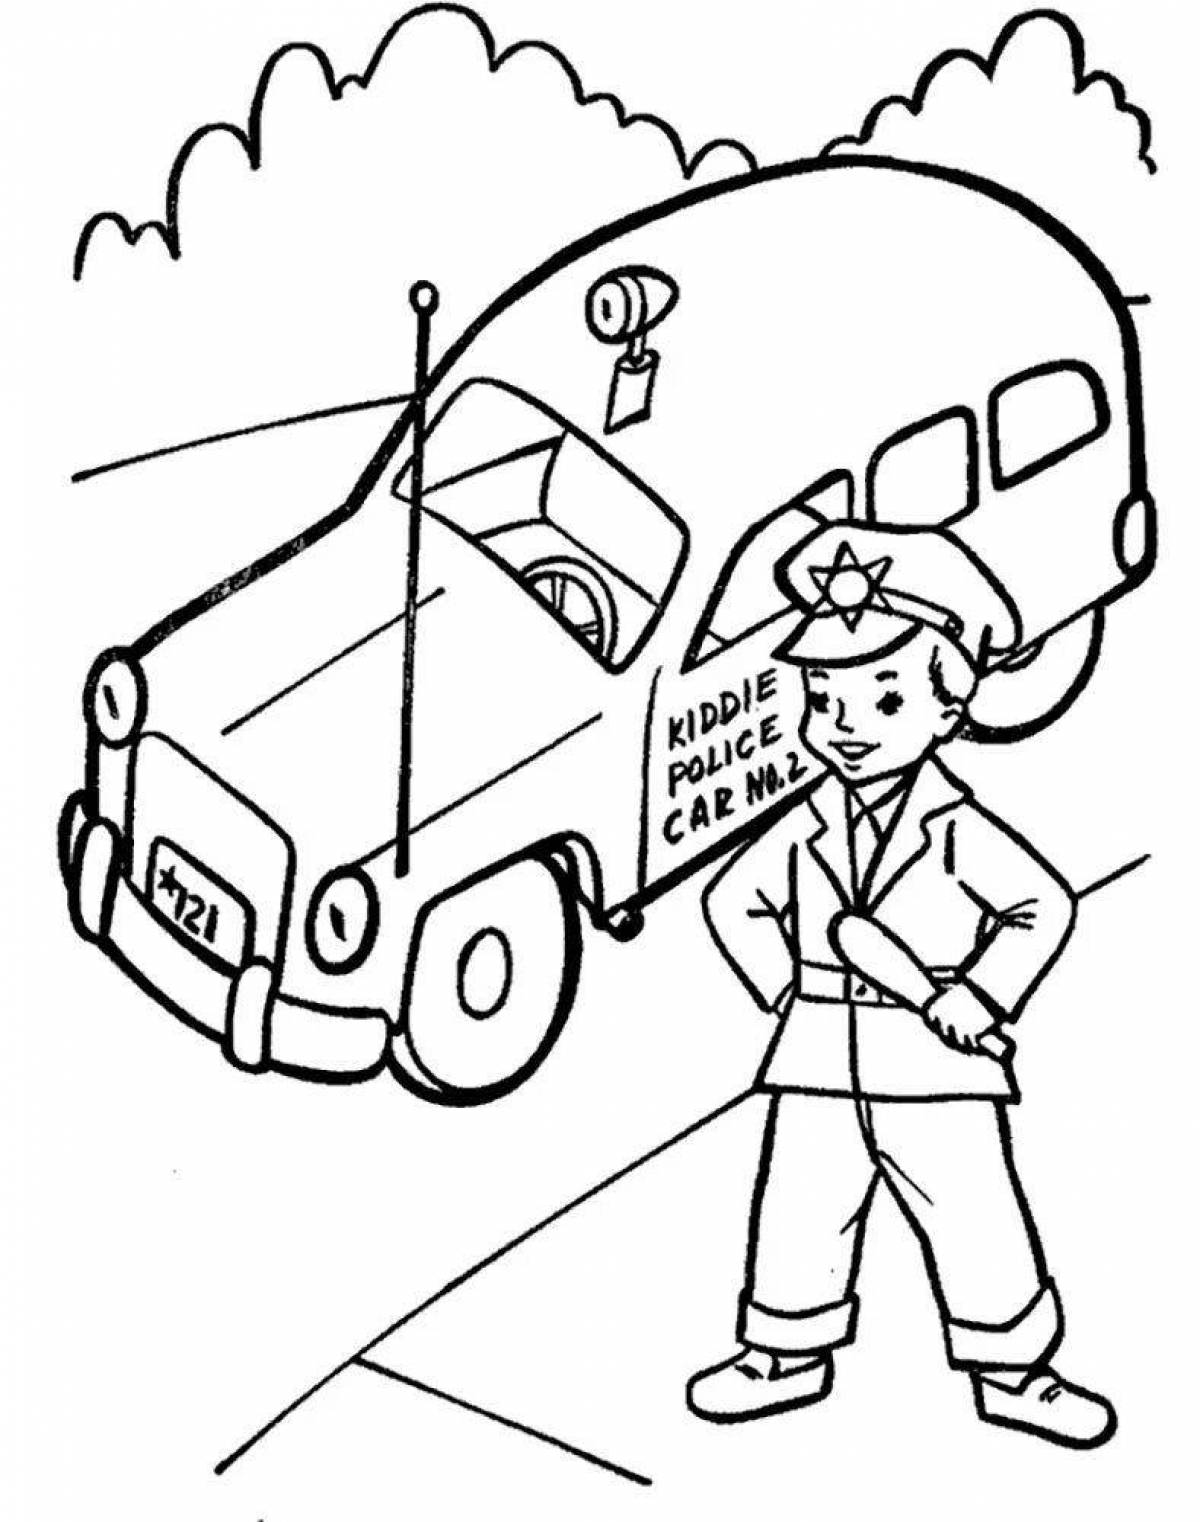 Colorful traffic police coloring page